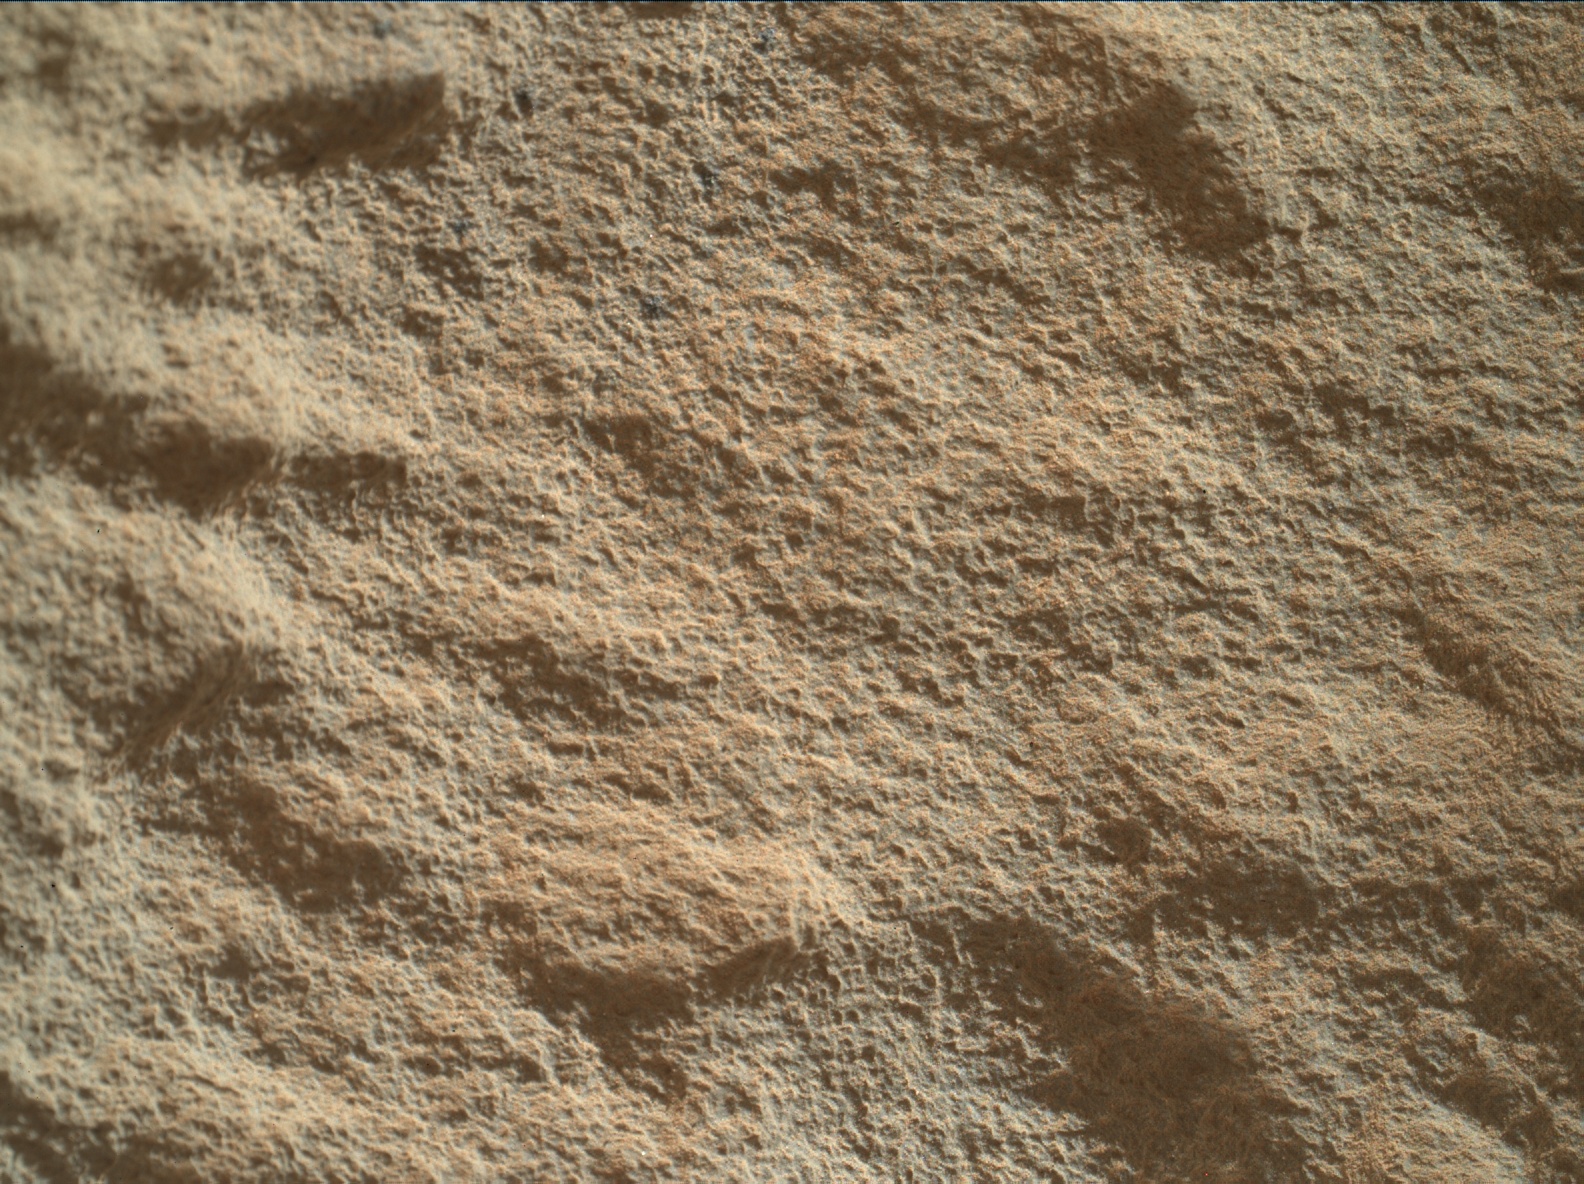 Nasa's Mars rover Curiosity acquired this image using its Mars Hand Lens Imager (MAHLI) on Sol 322